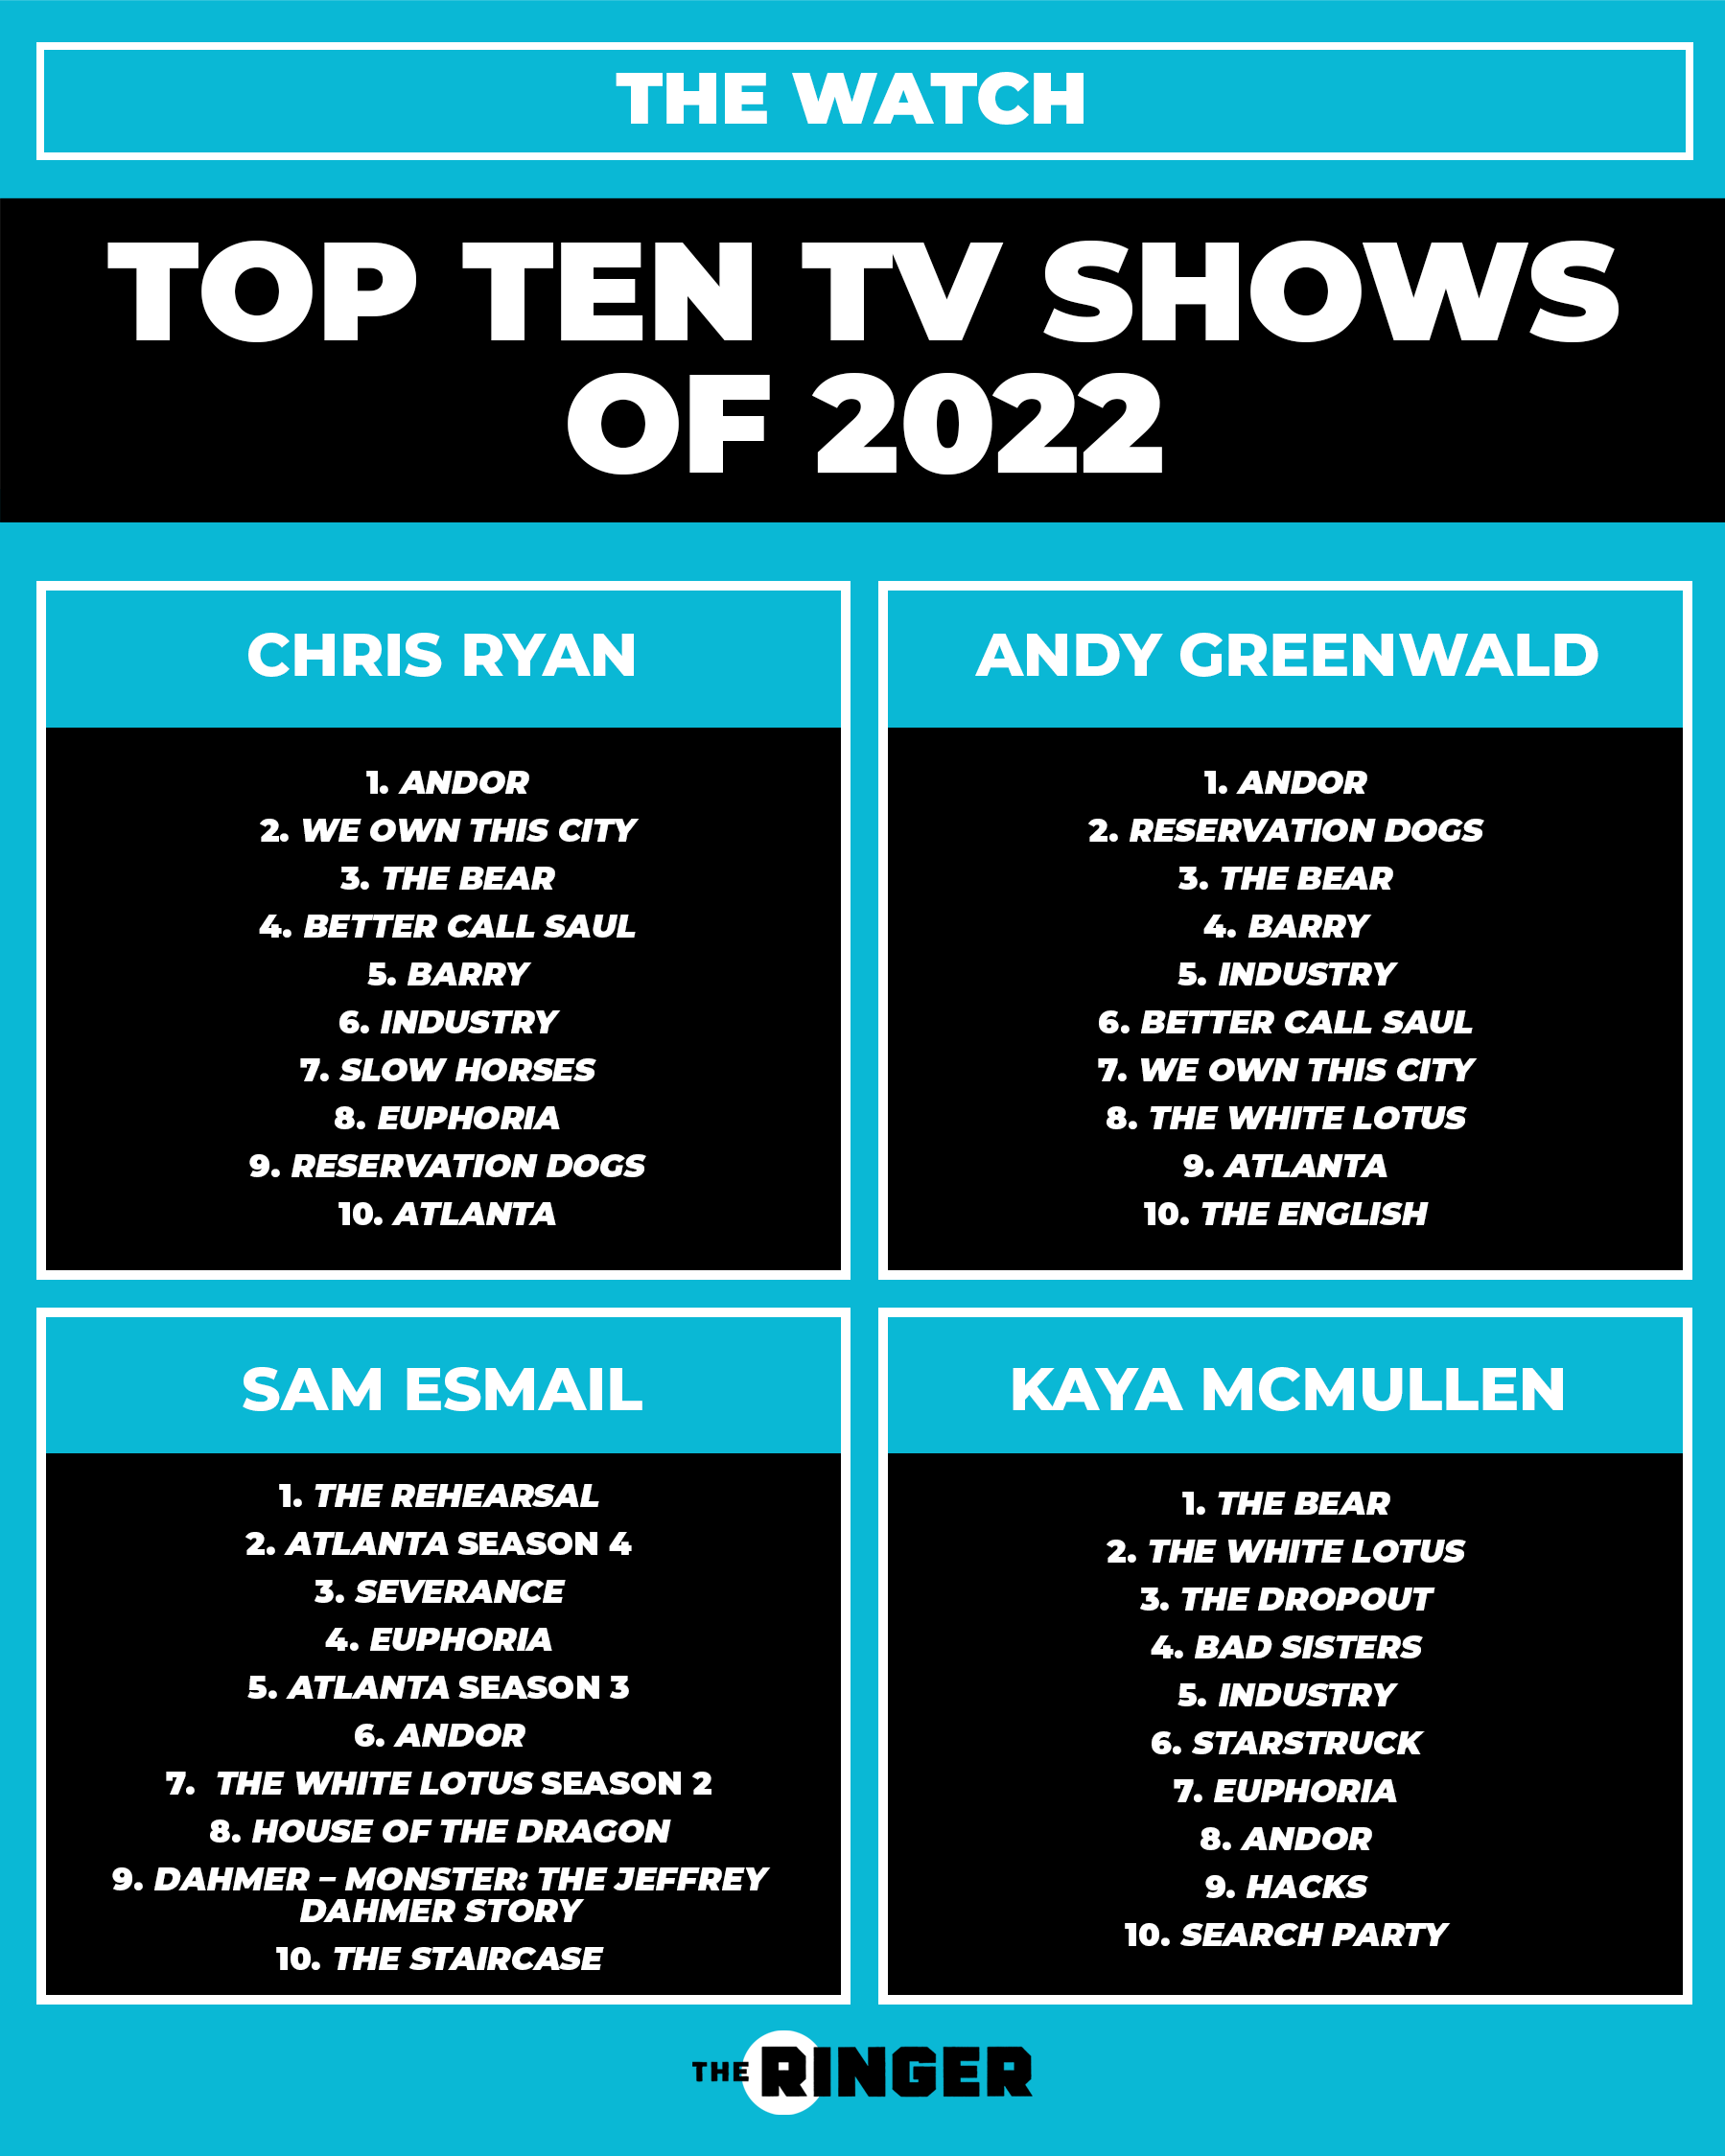 The Watch on Twitter: case you Baranskis prefer to see our top 10 TV shows of 2022 in list form, here it is: https://t.co/ItmiofX6R5" Twitter